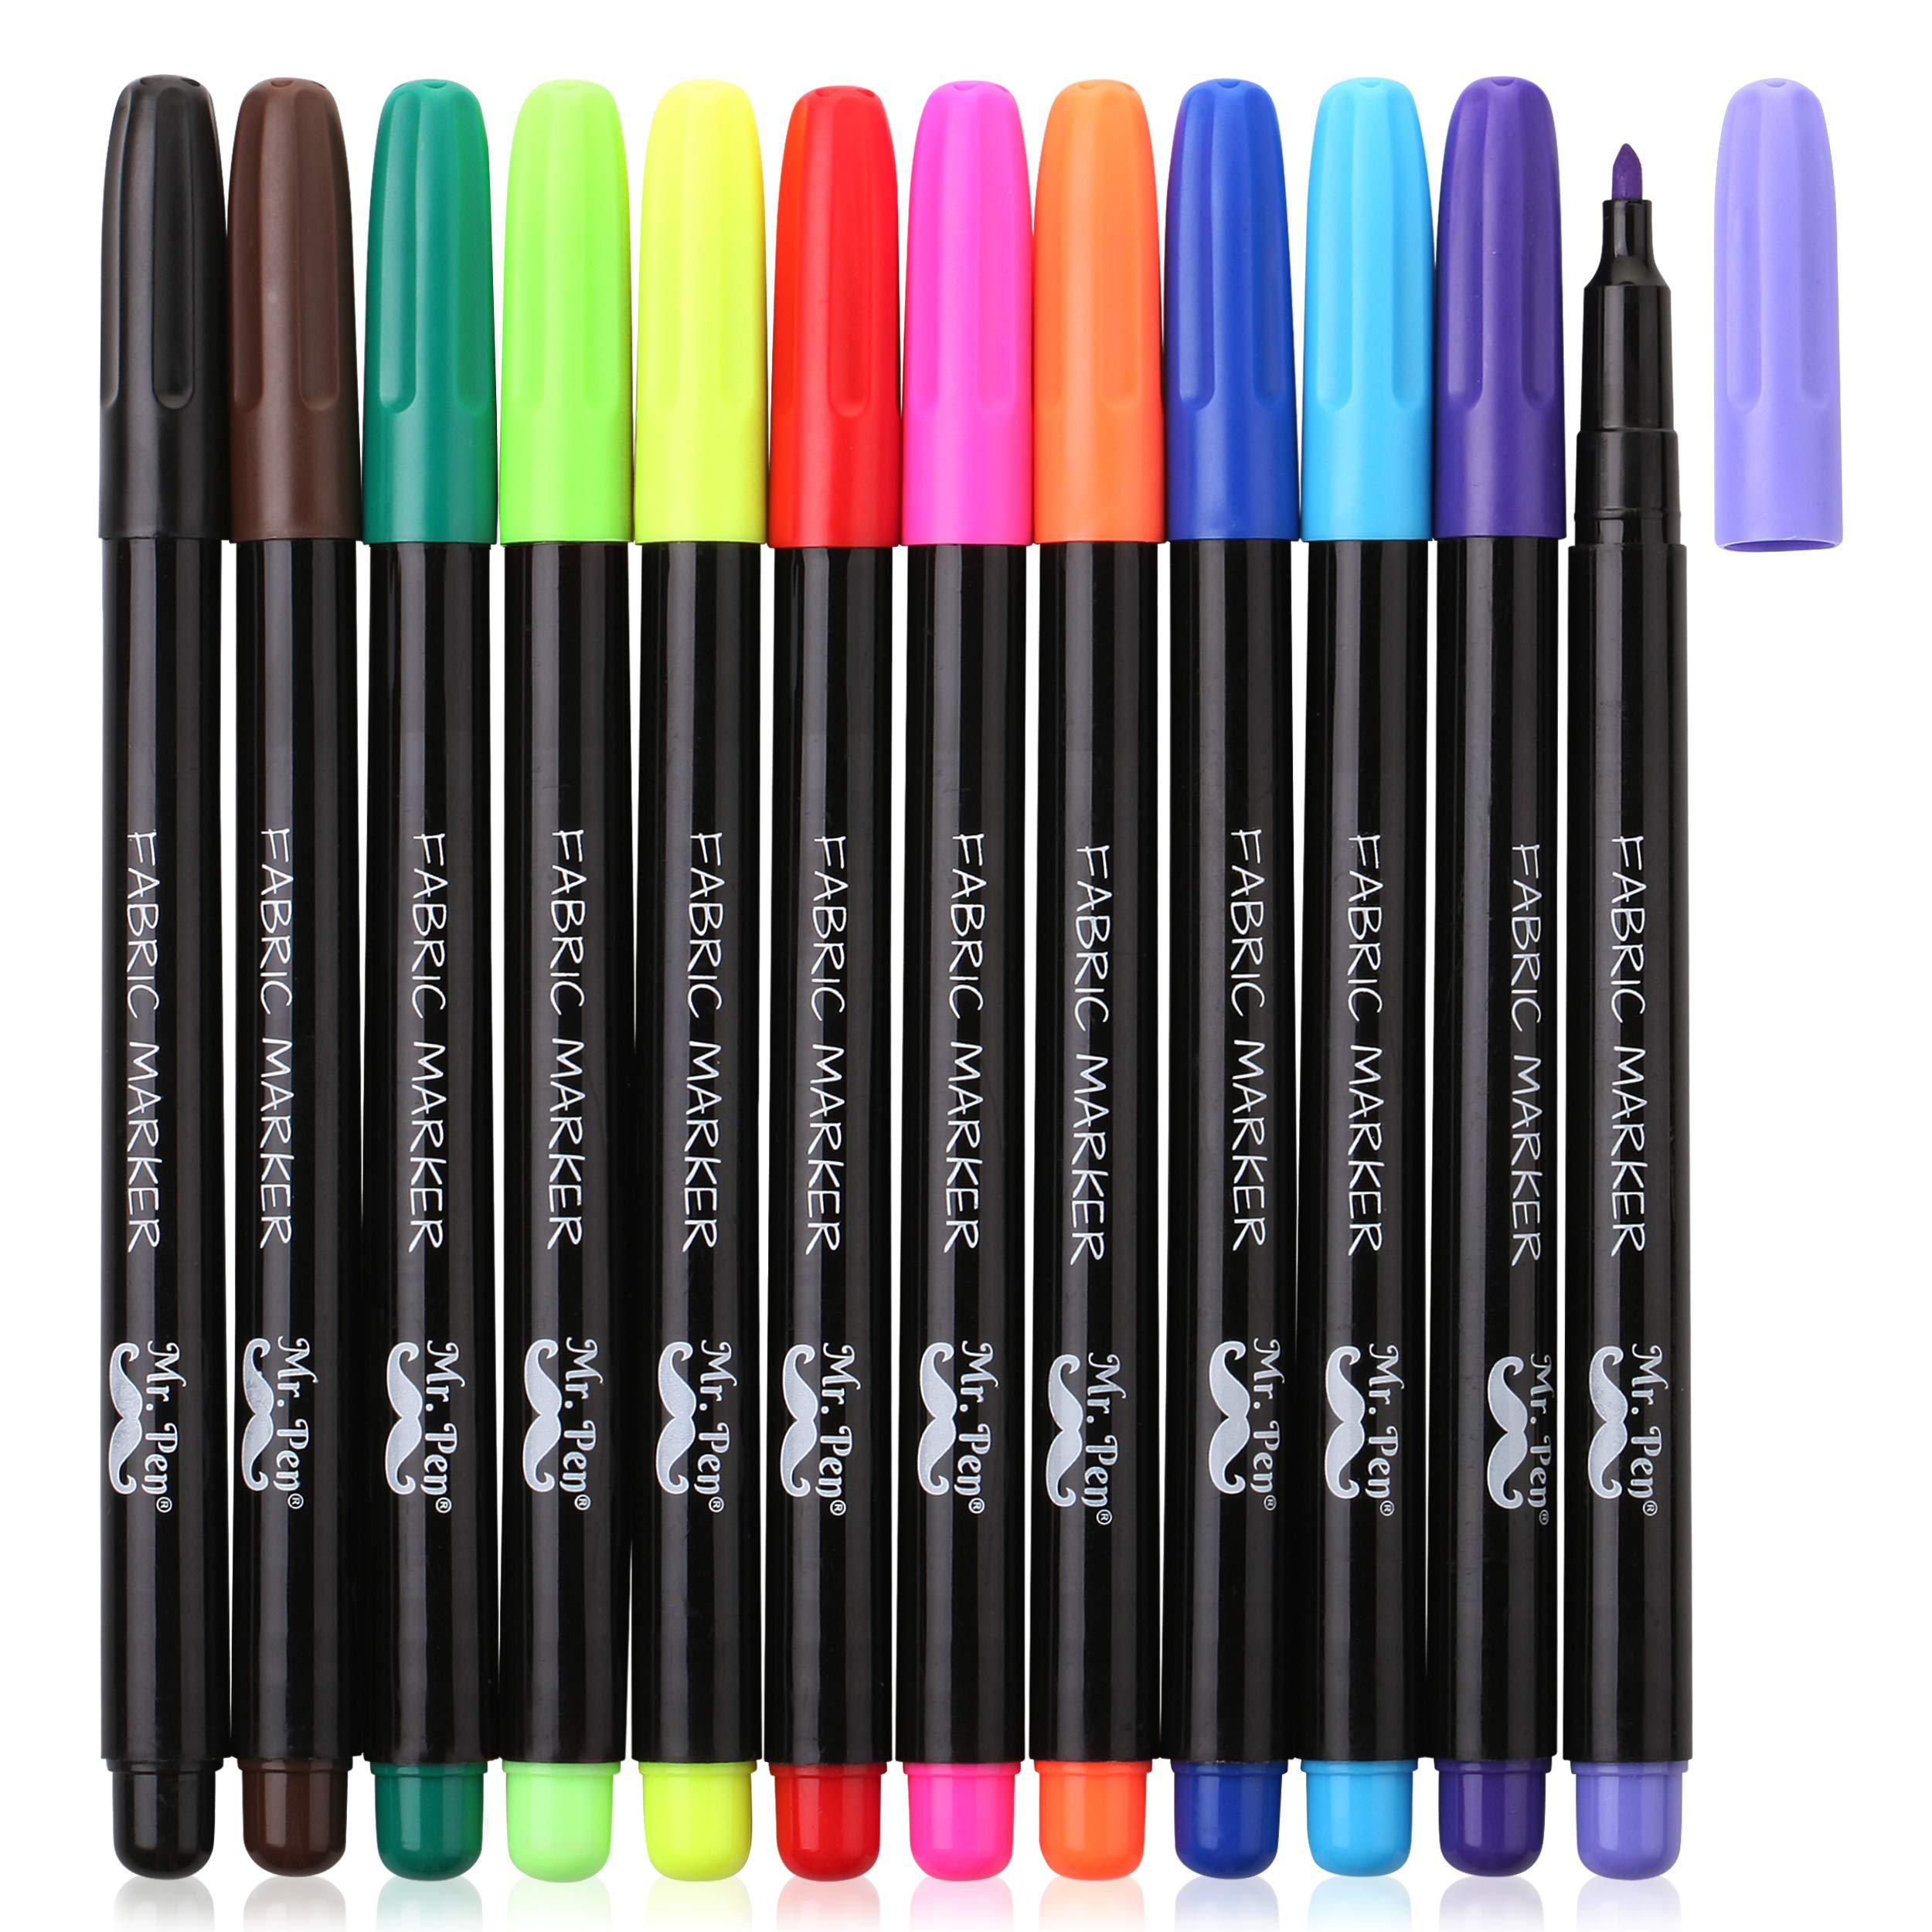 Mr. Pen RNAB0887W98GH mr. pen- fabric markers,12 pack, fabric markers  permanent, fabric paint markers, fabric pen, permanent fabric markers  assorte